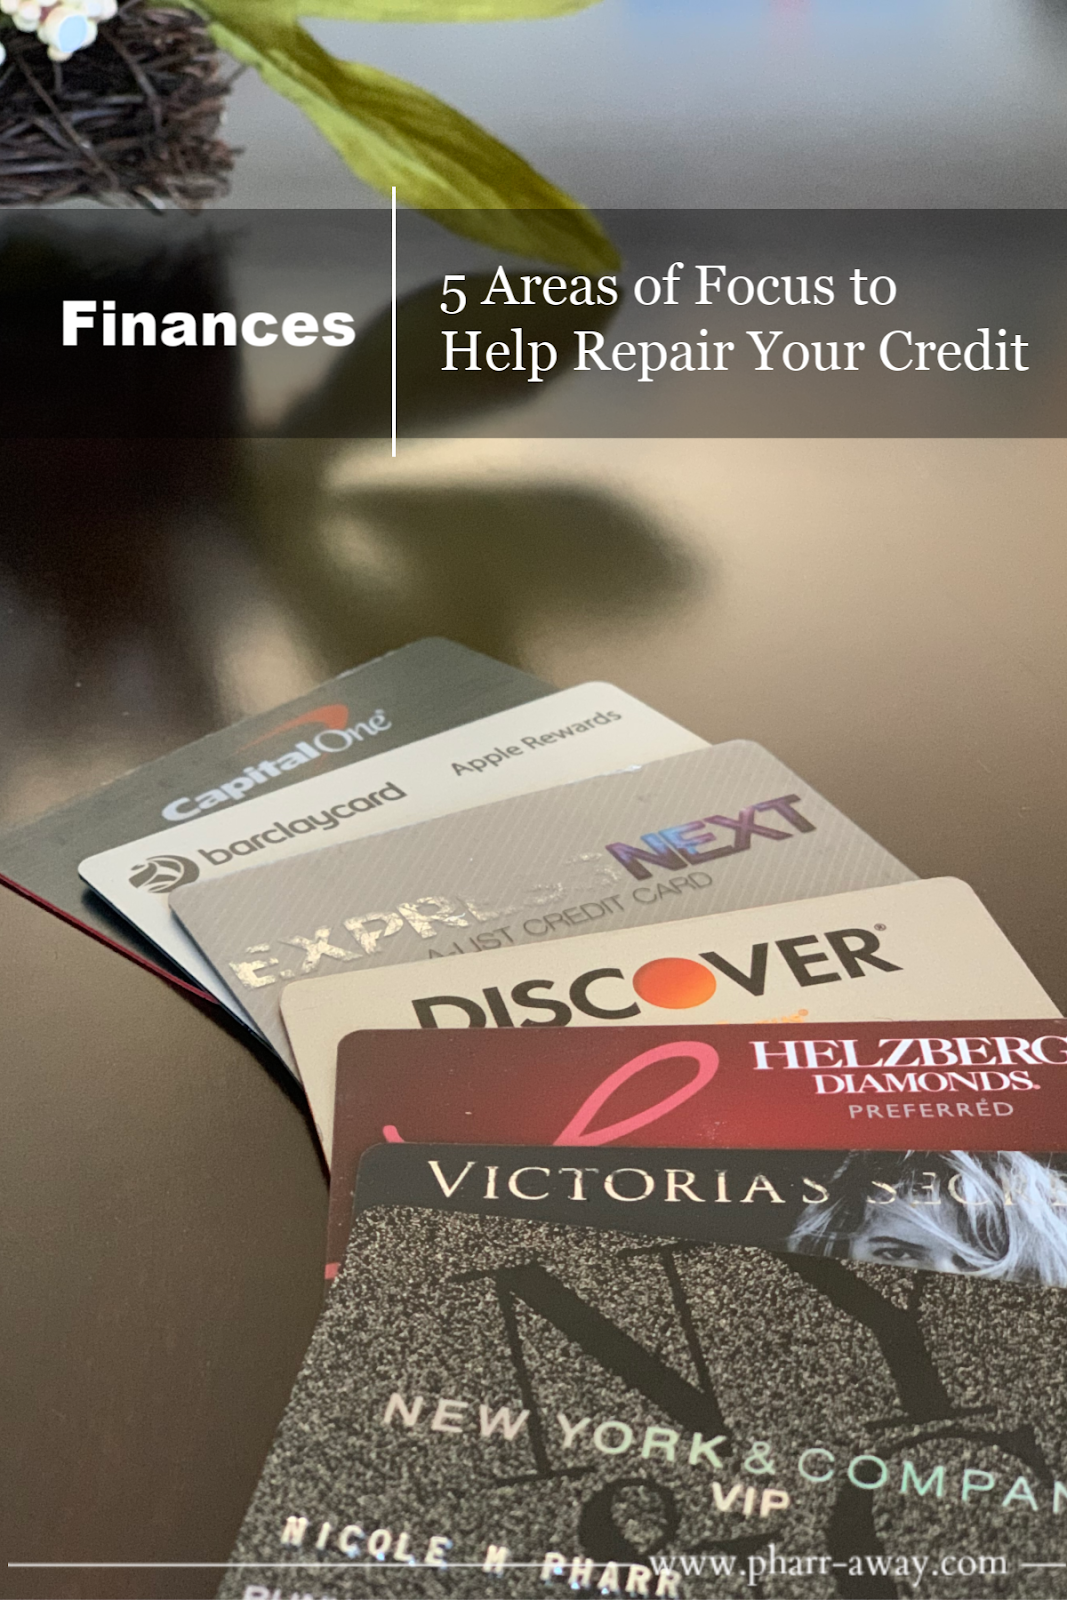 Five Areas of Focus to Help Repair Your Credit with the Support of Lexington Law Firm